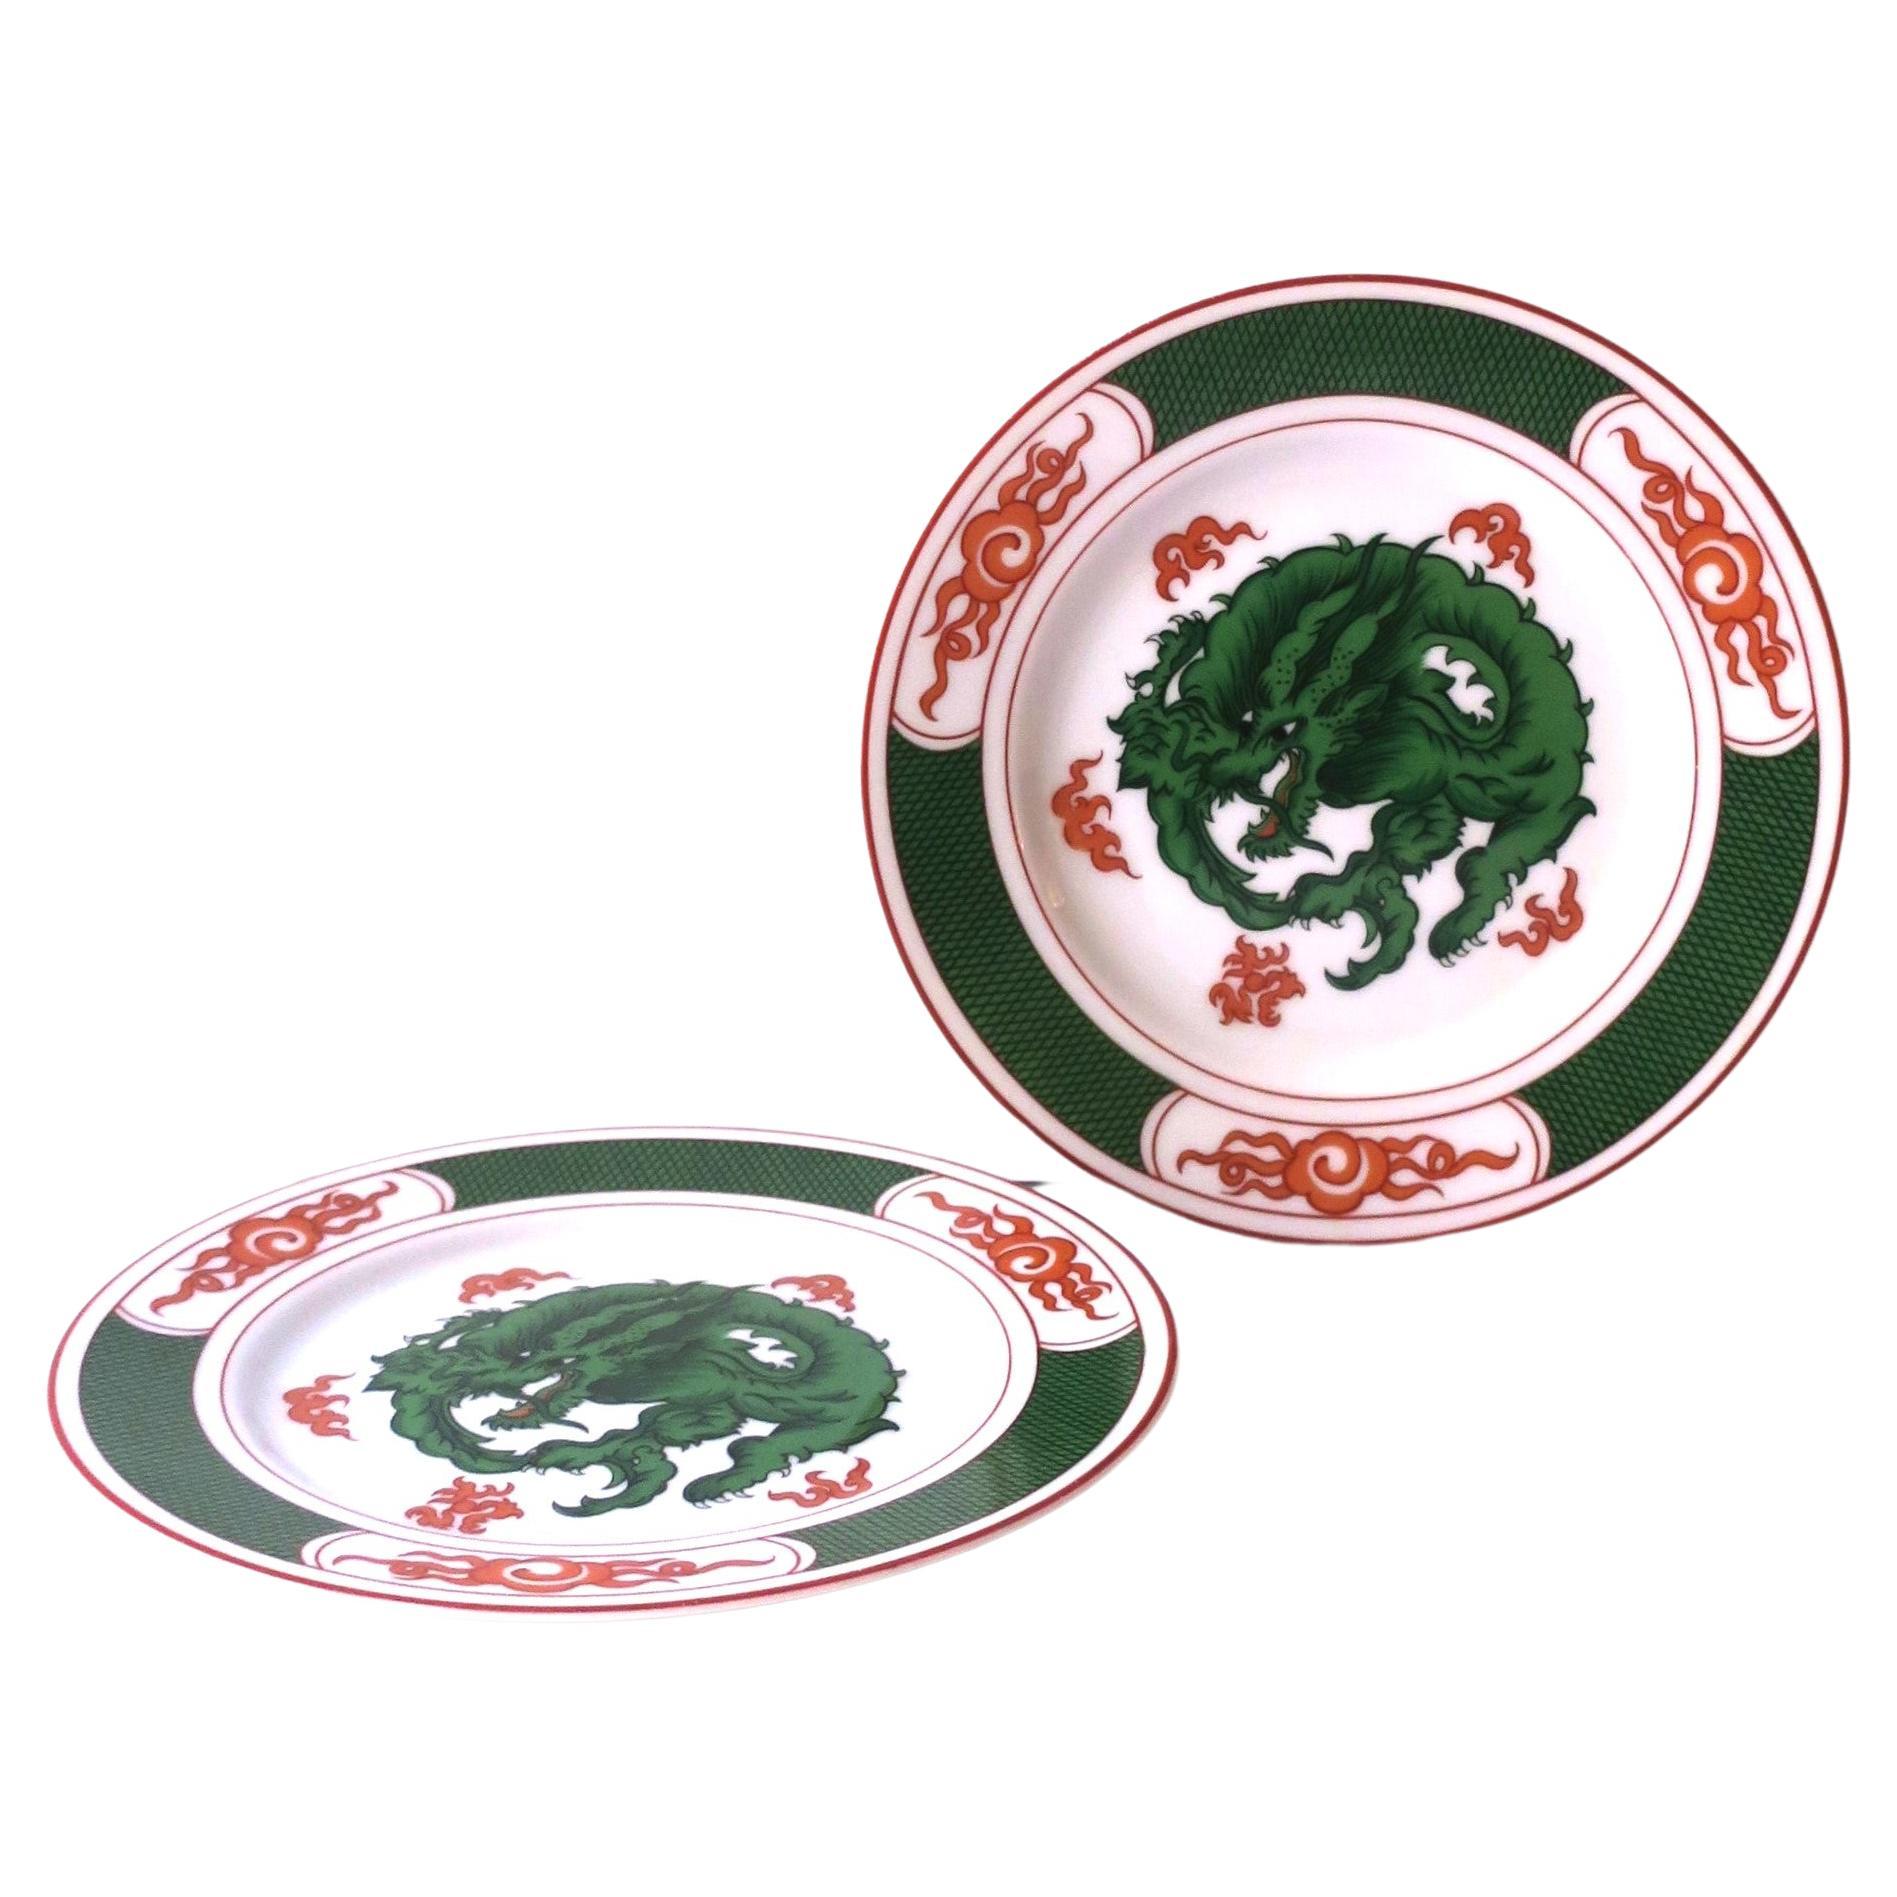 20th Century Porcelain Plates with Dragon Design, Set of 2 For Sale